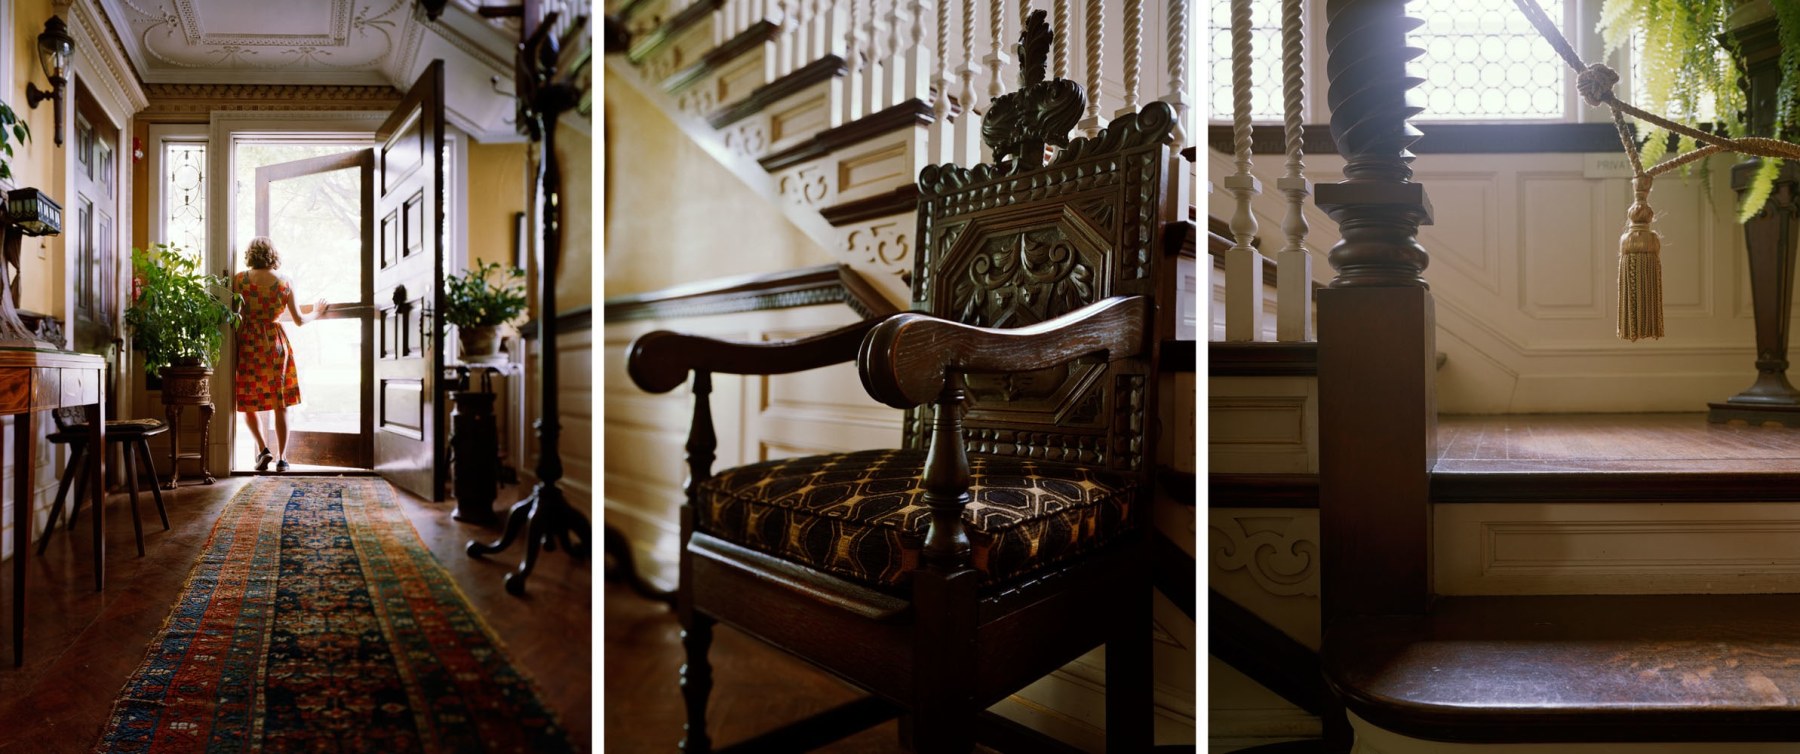 Having Seen Shakespeare&#039;s Chair, 2005.&nbsp;Three-panel archival pigment print, available as&nbsp;24 x 60 or 40 x 90 inches.&nbsp;